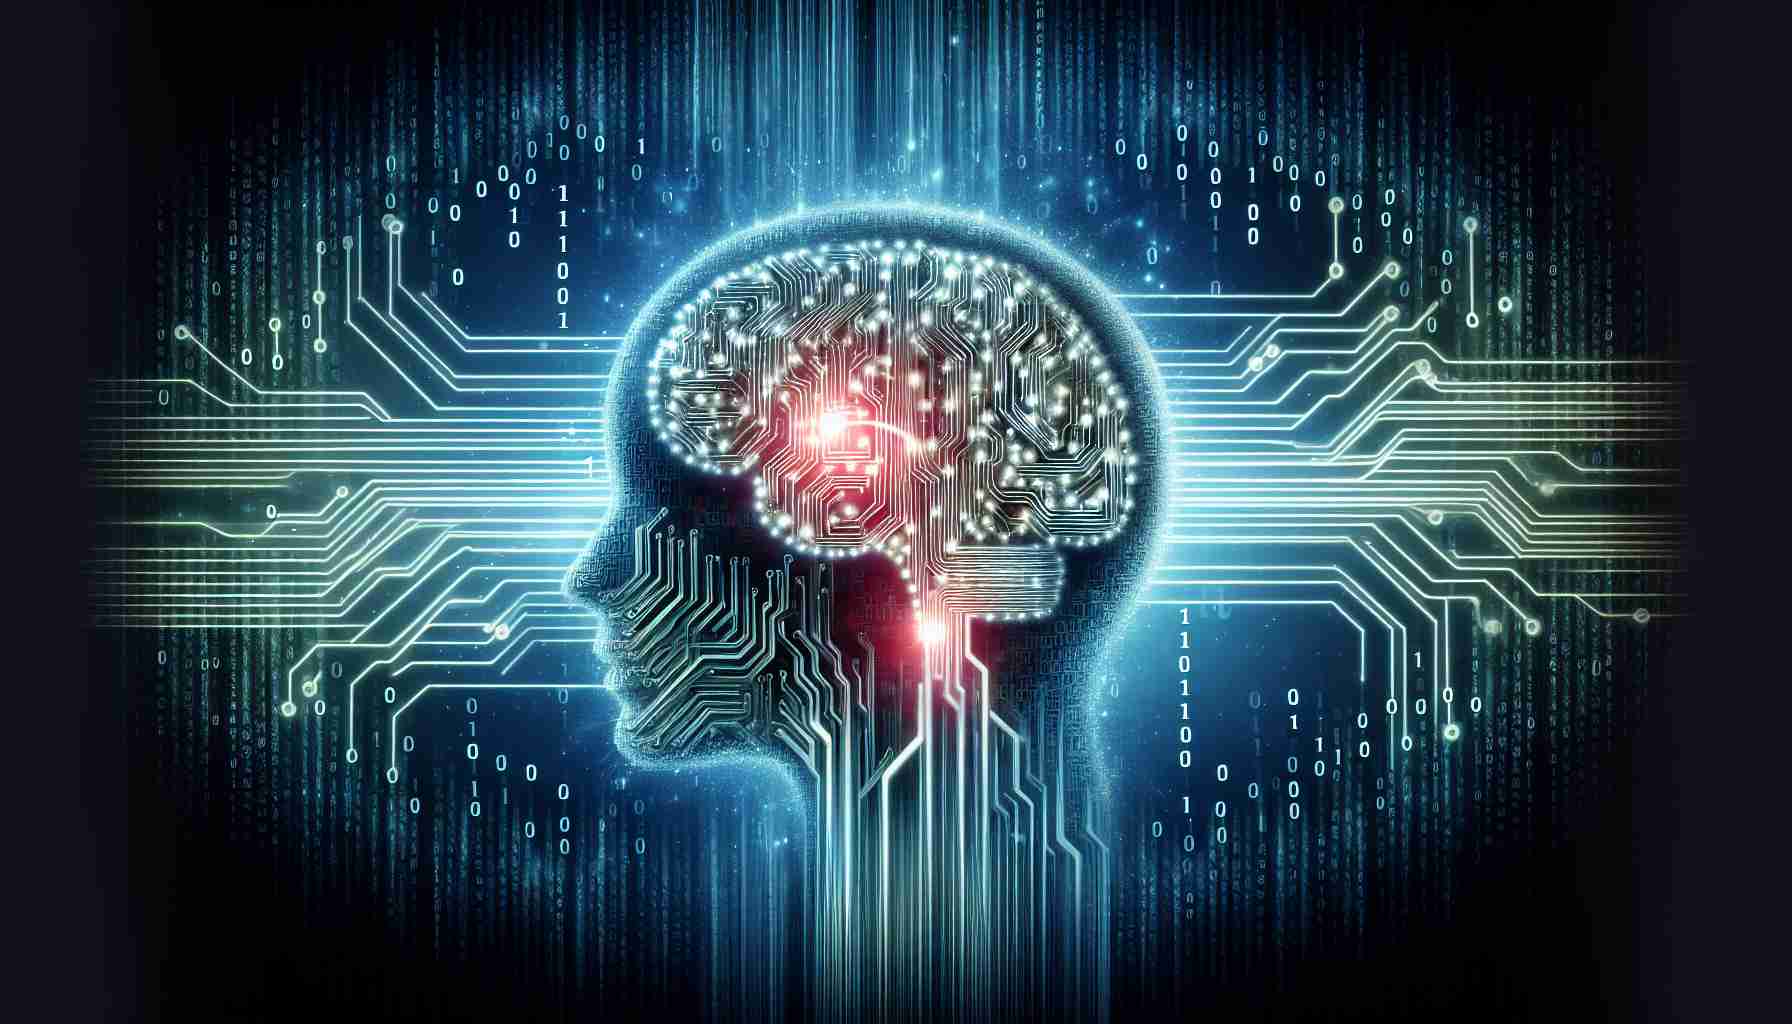 Artificial Intelligence: A Game Changer in the Near Future